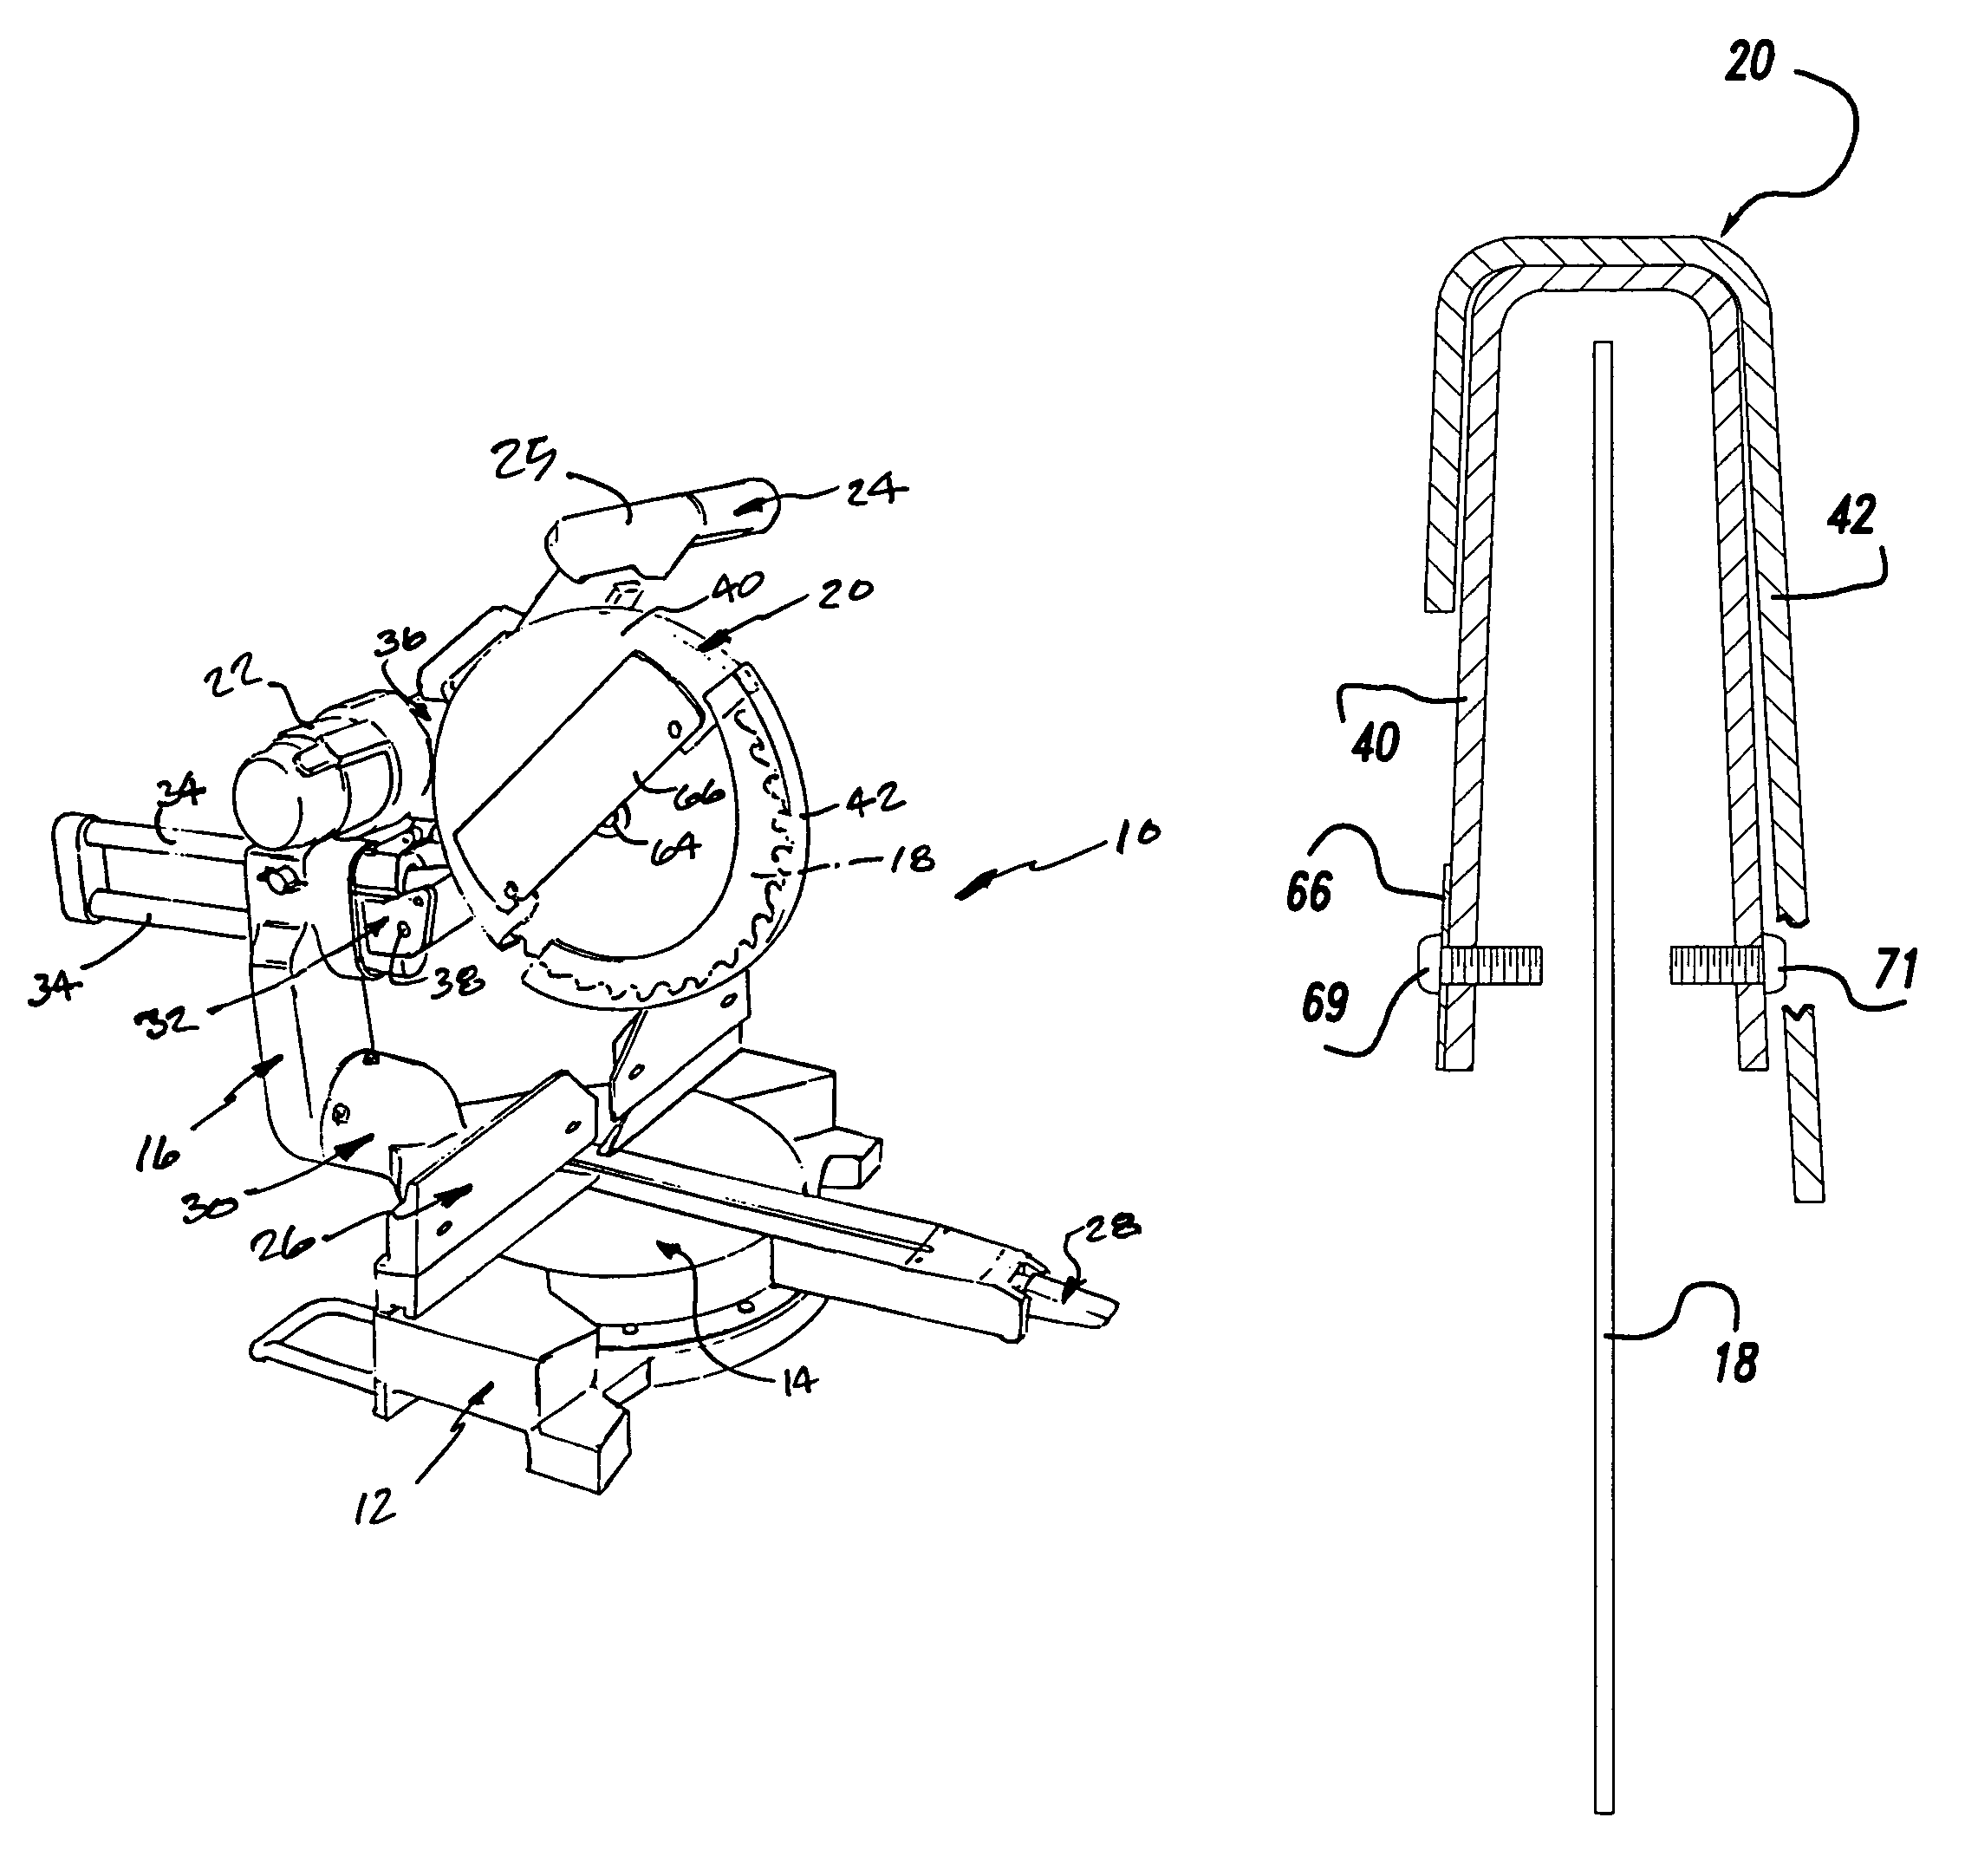 Guard and control apparatuses for sliding compound miter saw